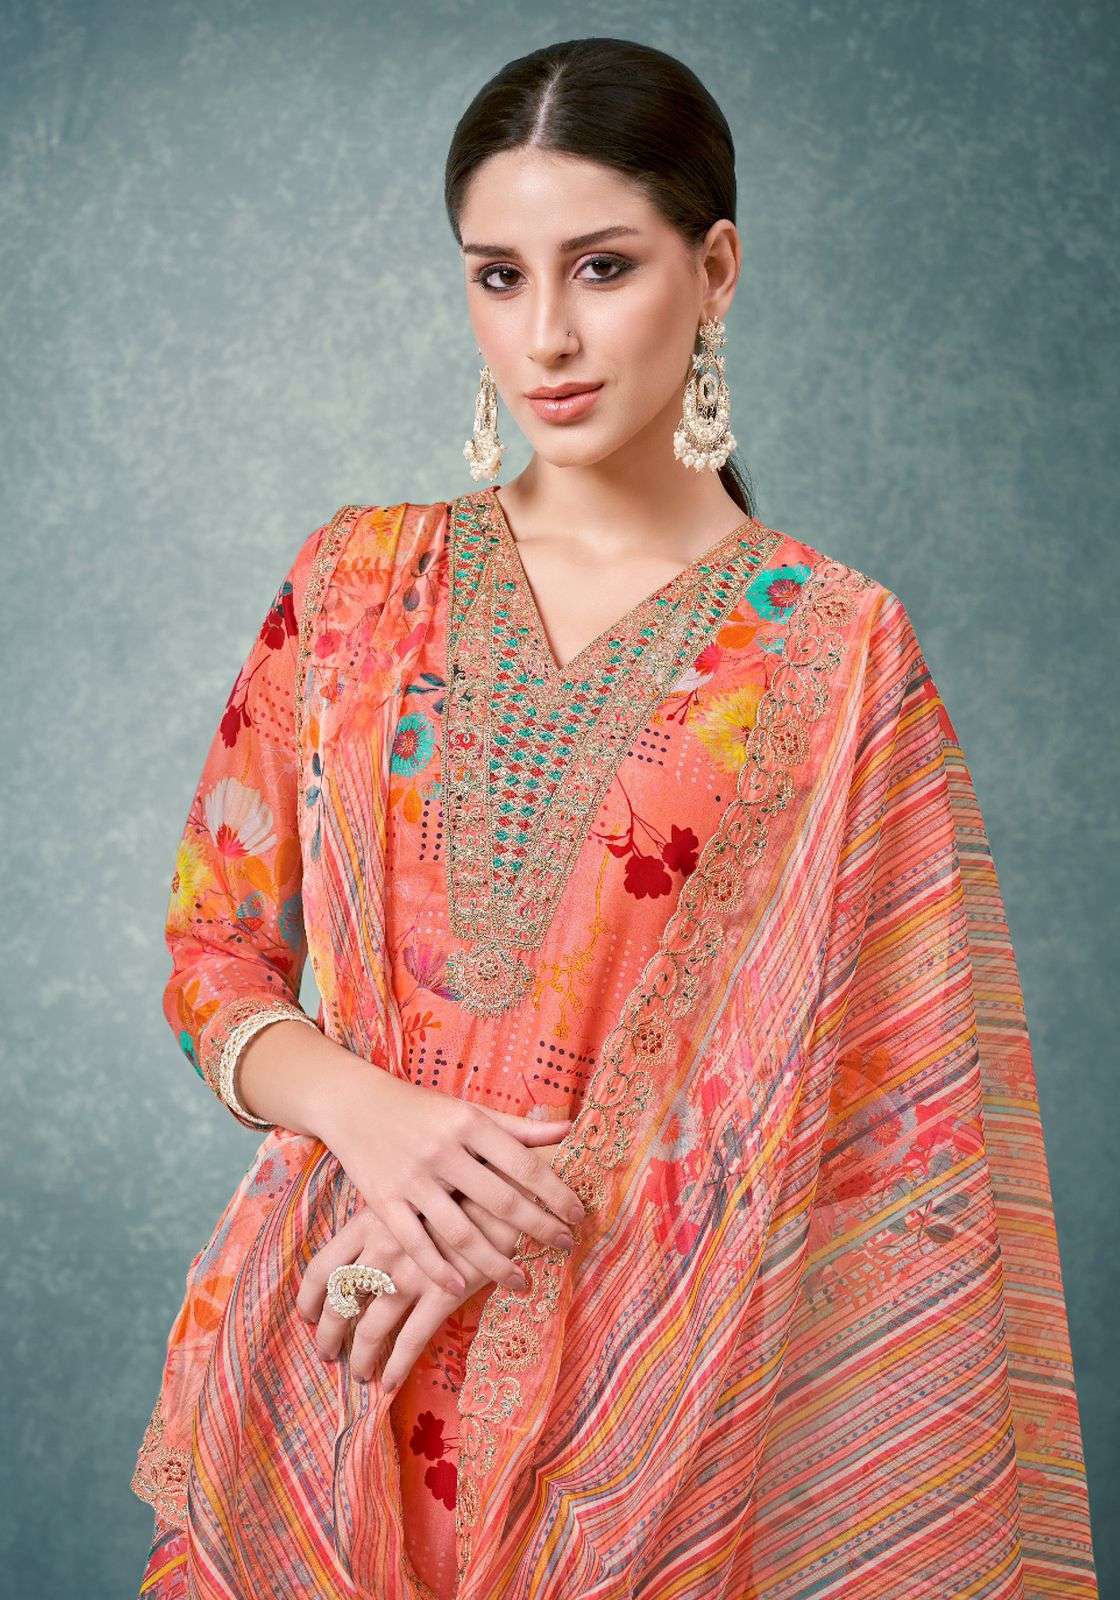 Alok Suit Evergreen Organza With Embroidery Work Salwar Kameez Latest Collection